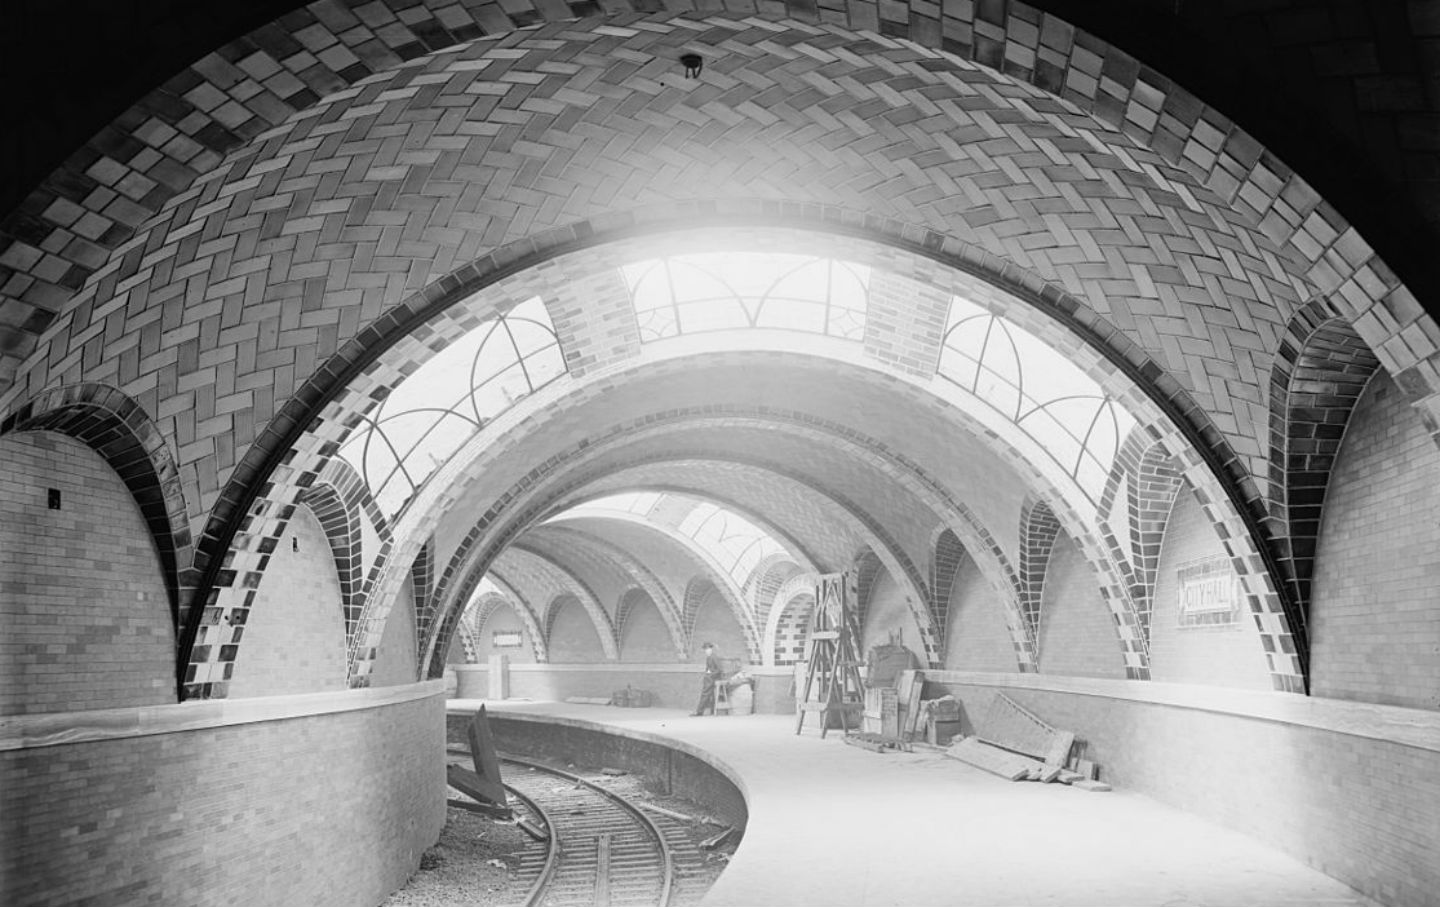 October 27, 1904: The New York City Subway System Opens